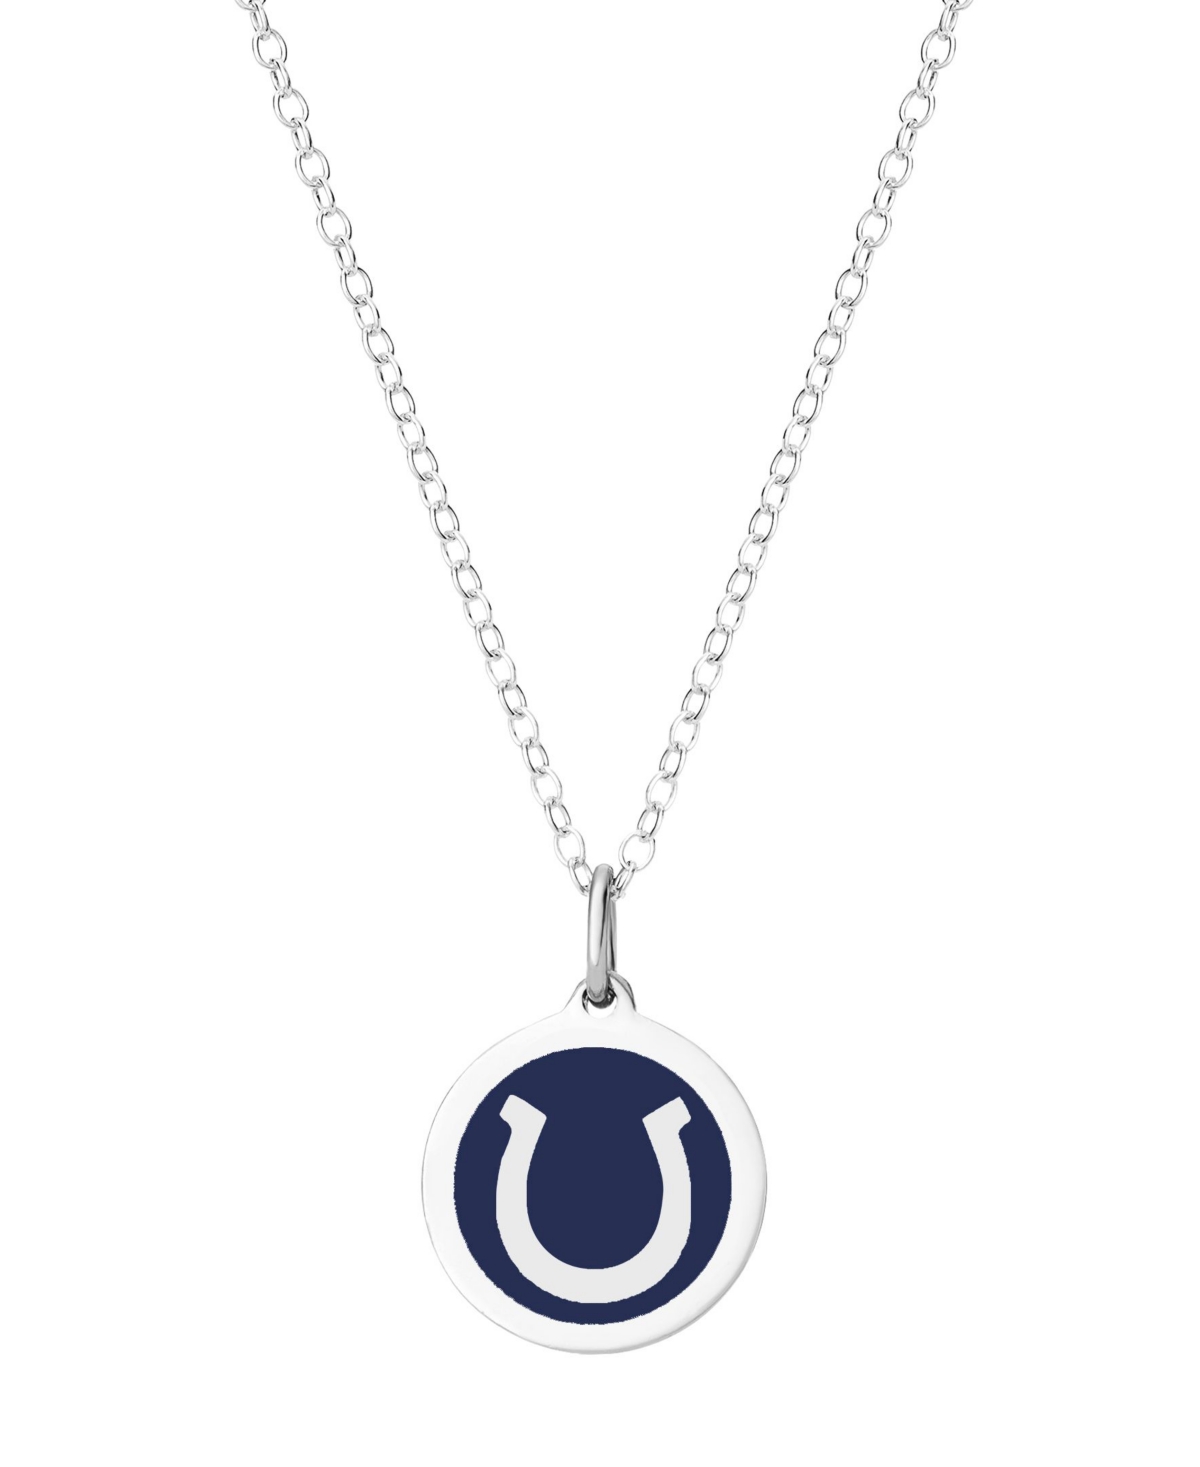 Mini Horseshoe Pendant Necklace in Sterling Silver and Enamel, 16" + 2" Extender - Navy